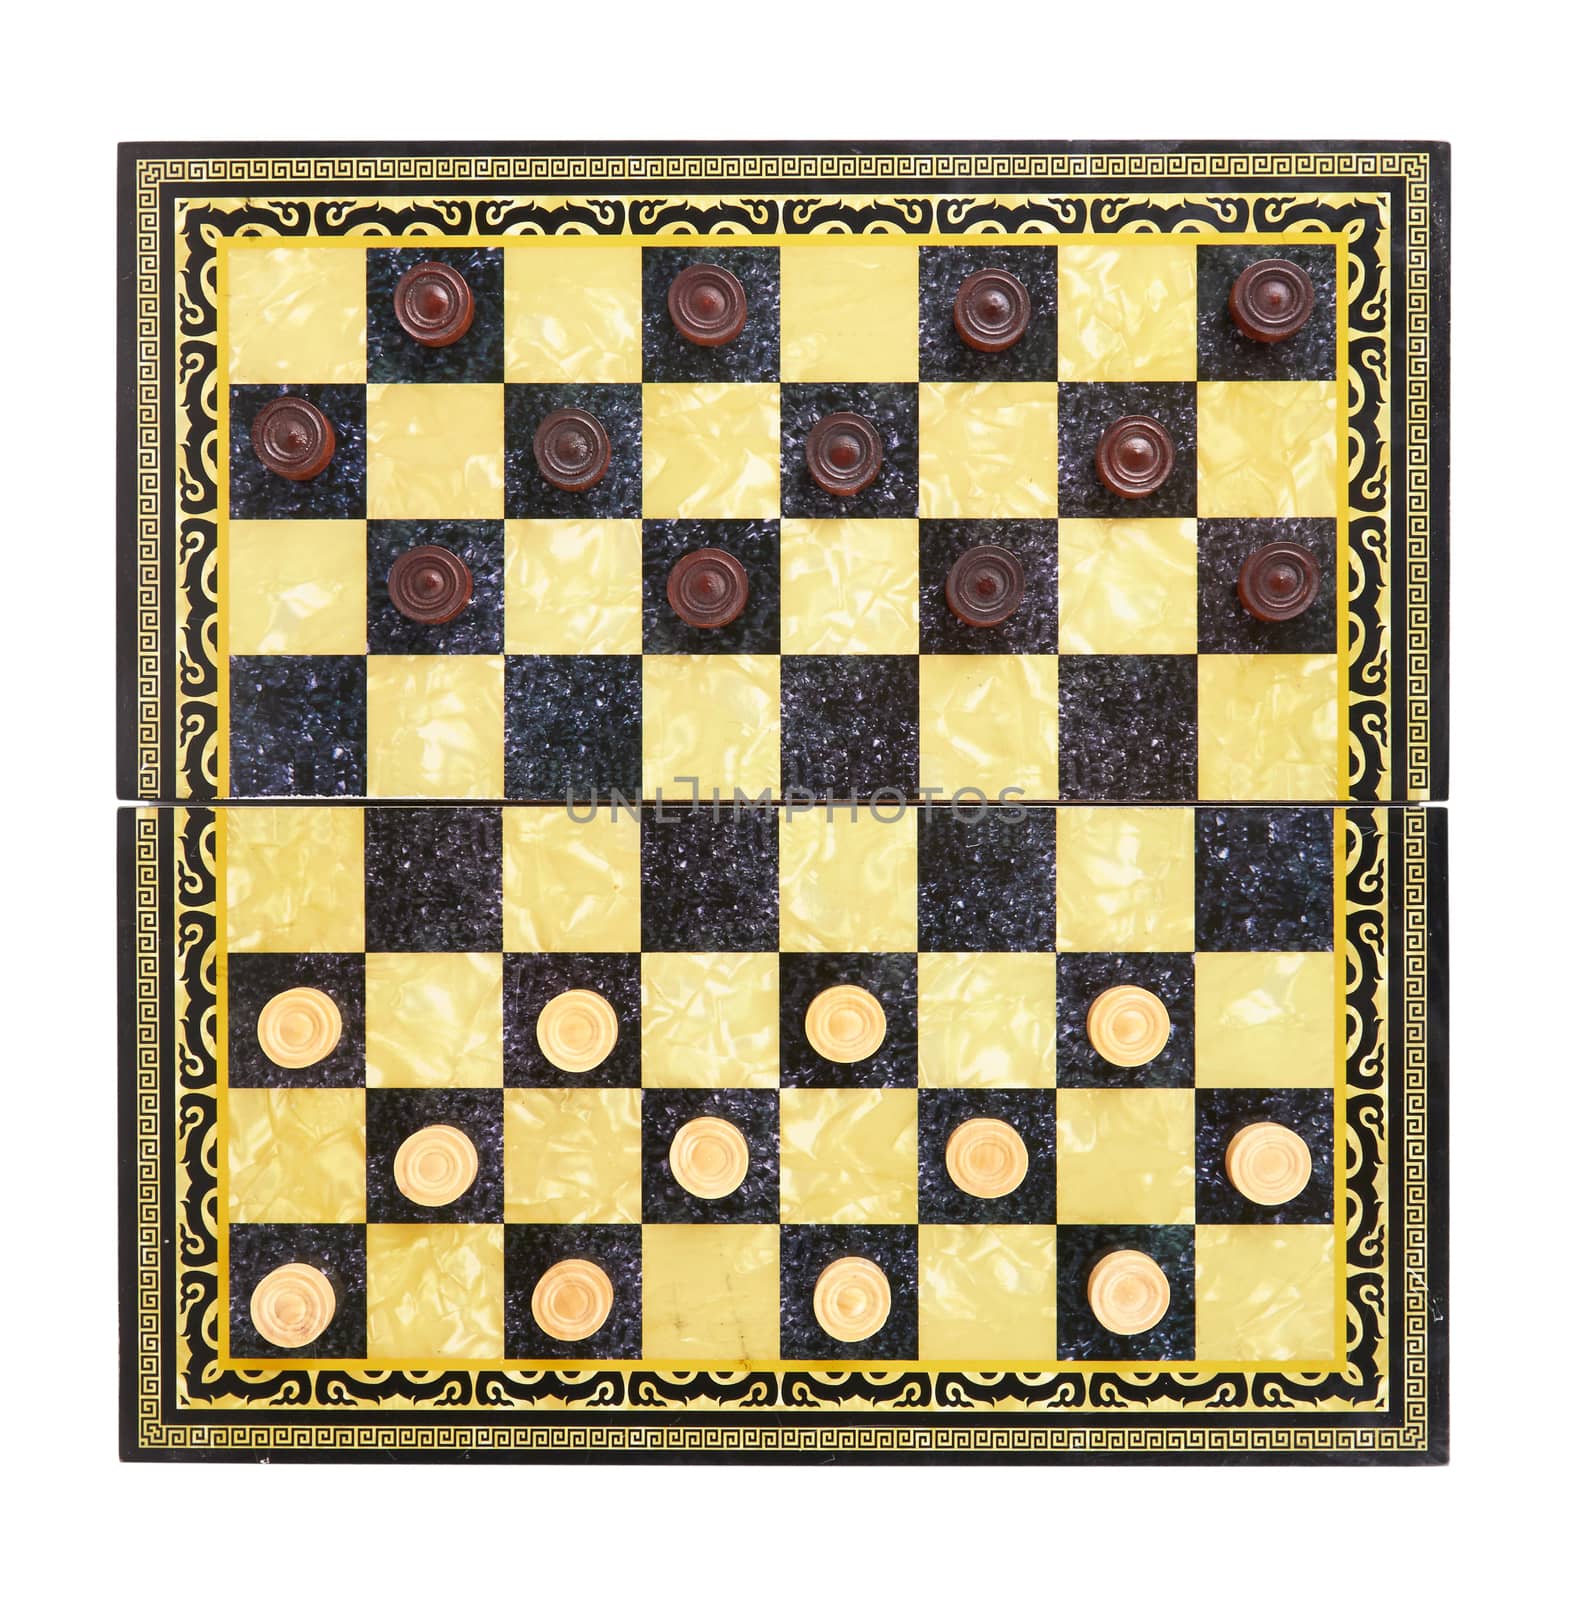 Playing checkers with wooden board,  black and white pawns